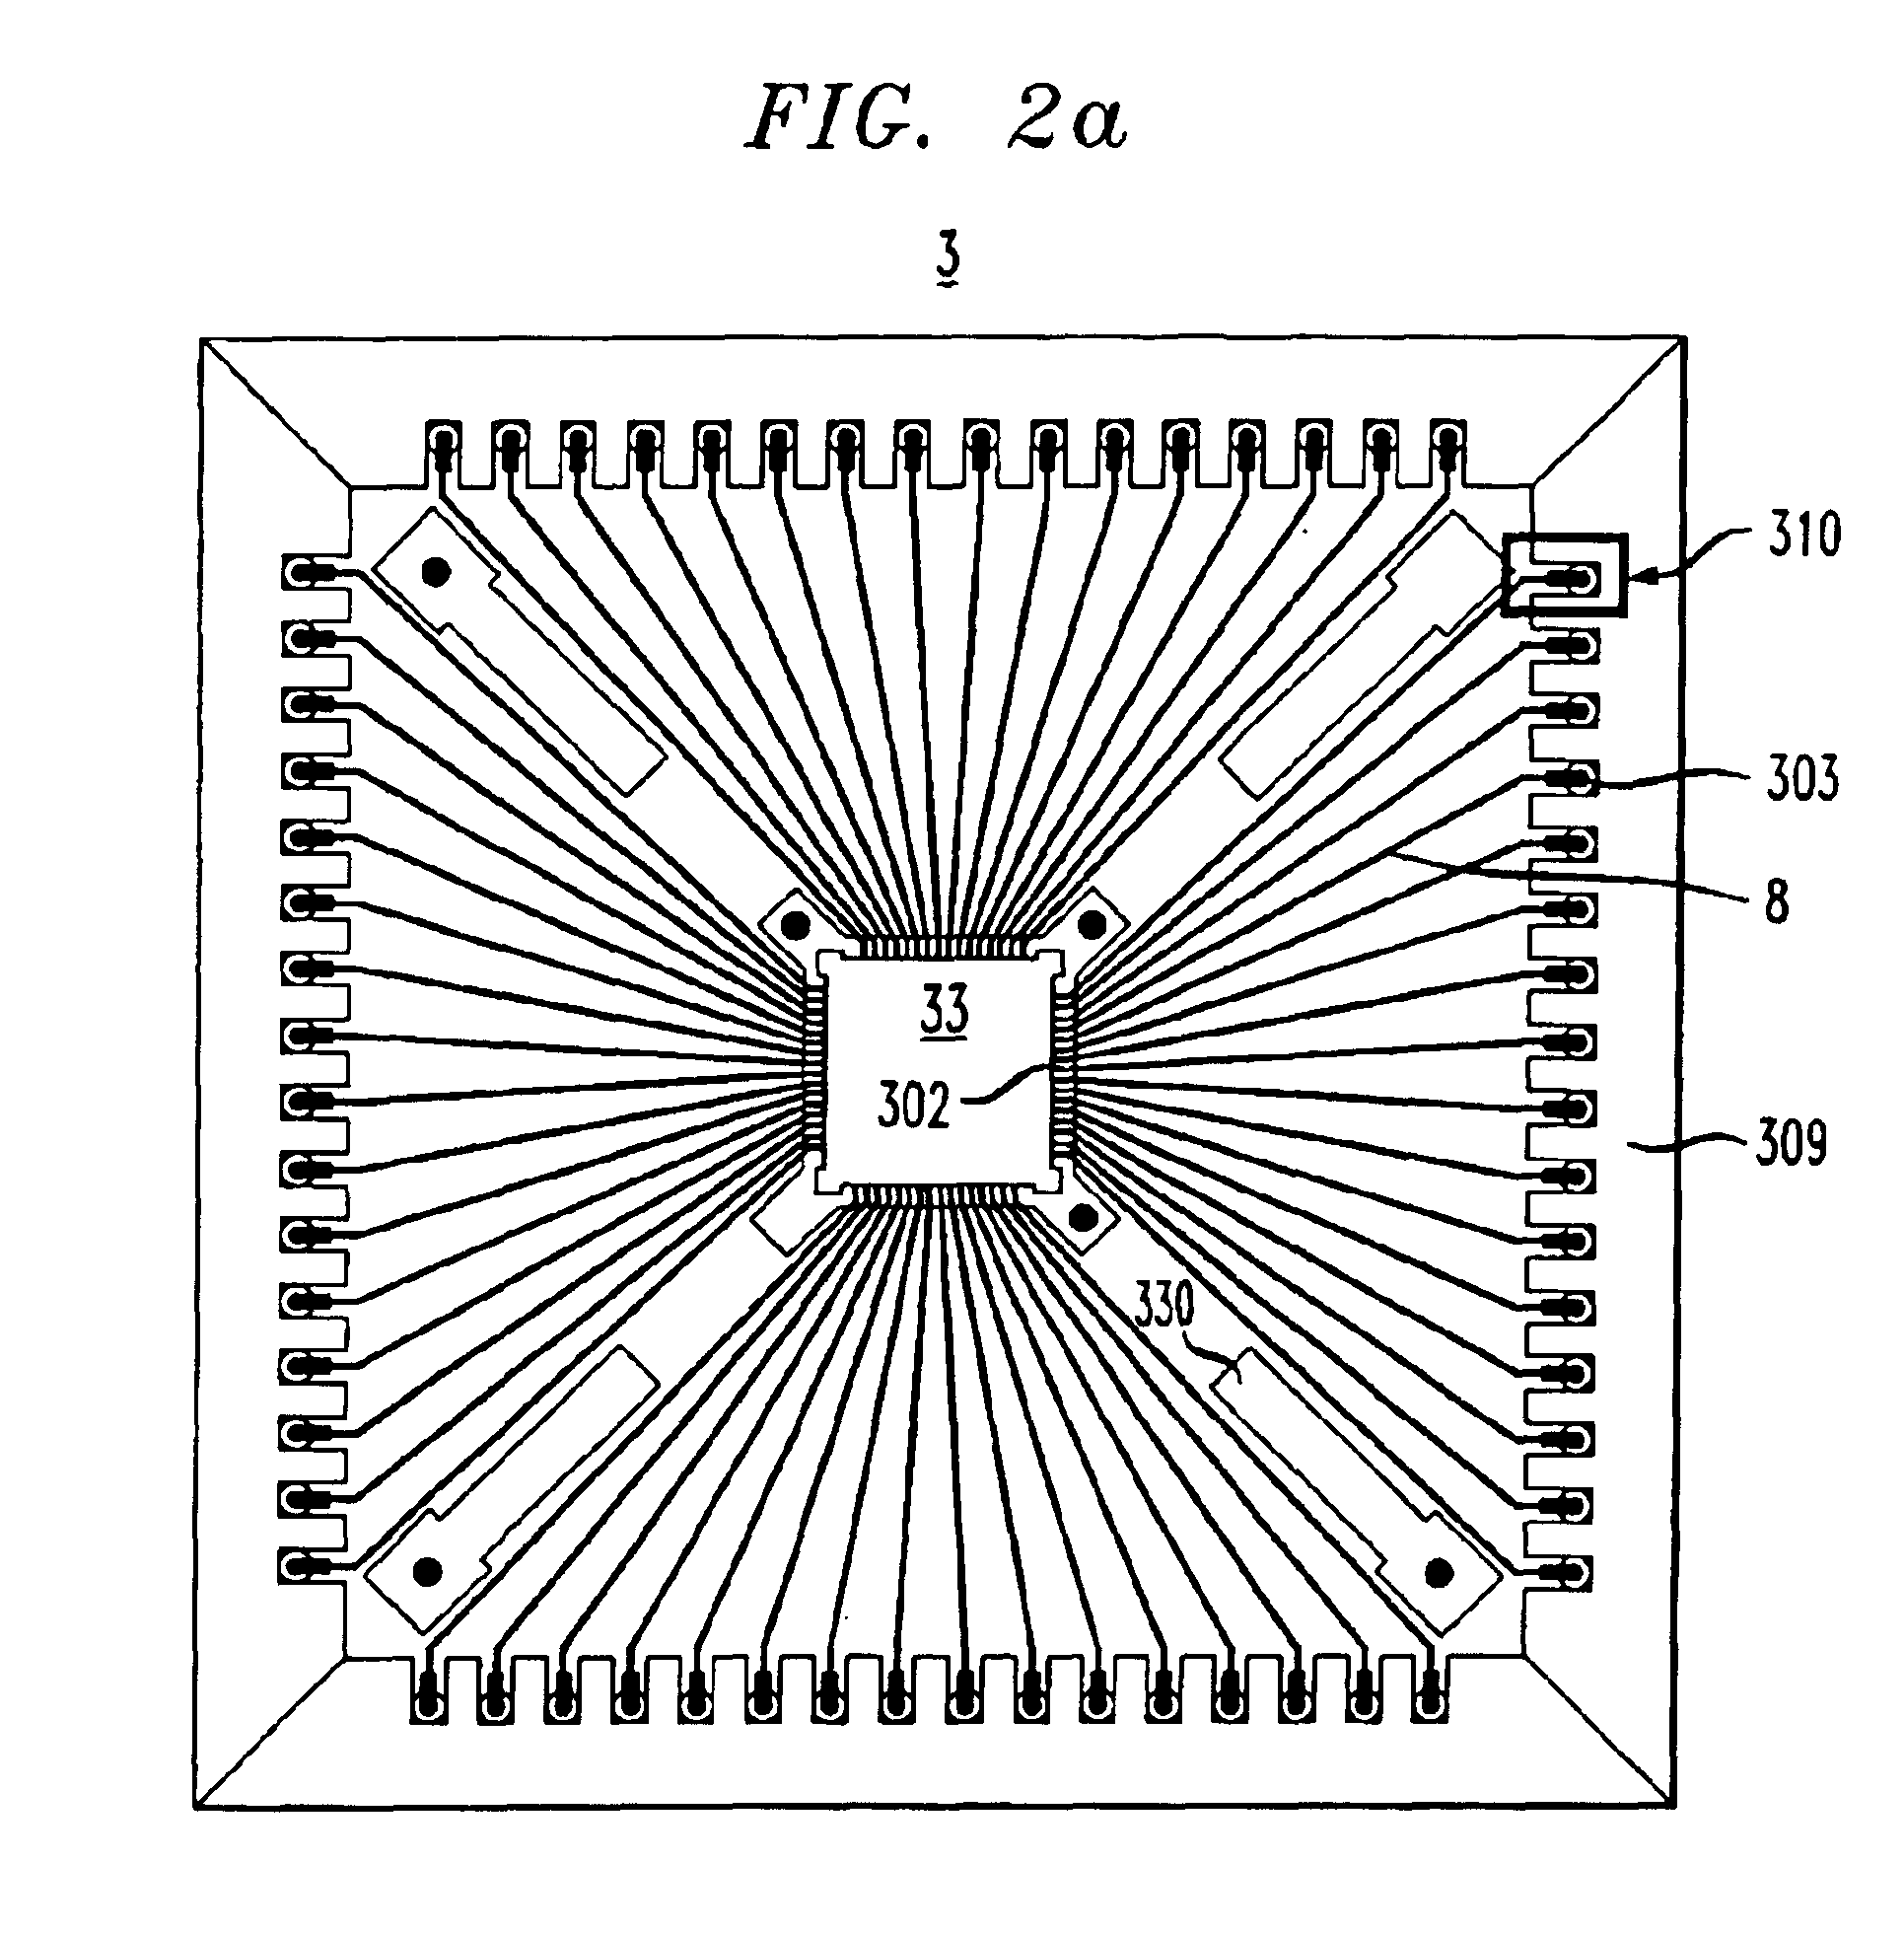 RF transition for an area array package